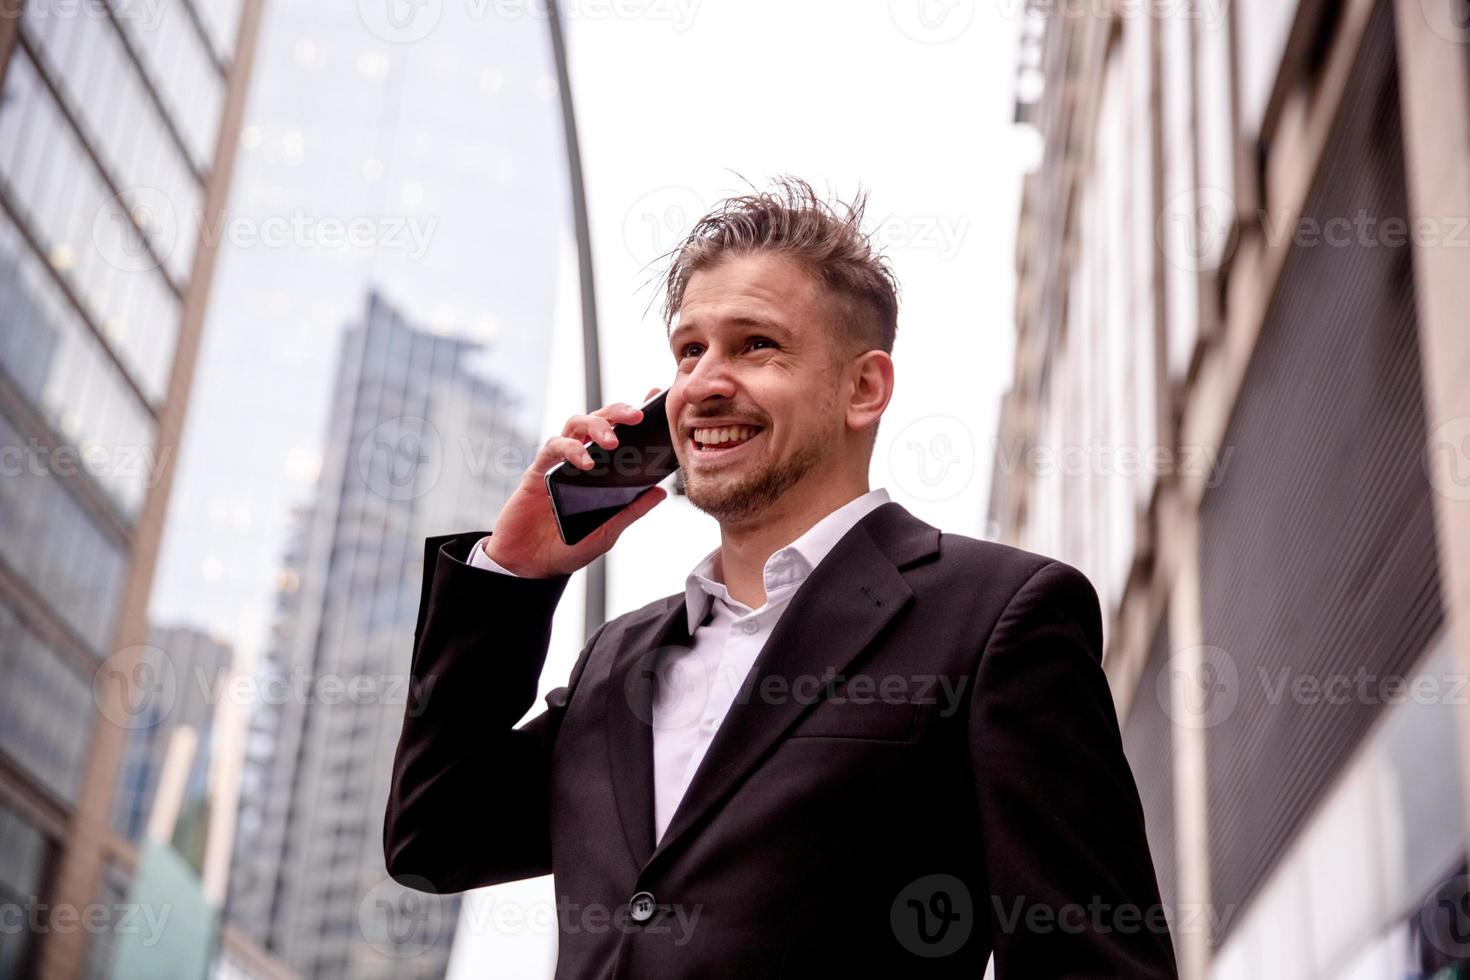 guy in a suit talking on the phone smiling photo